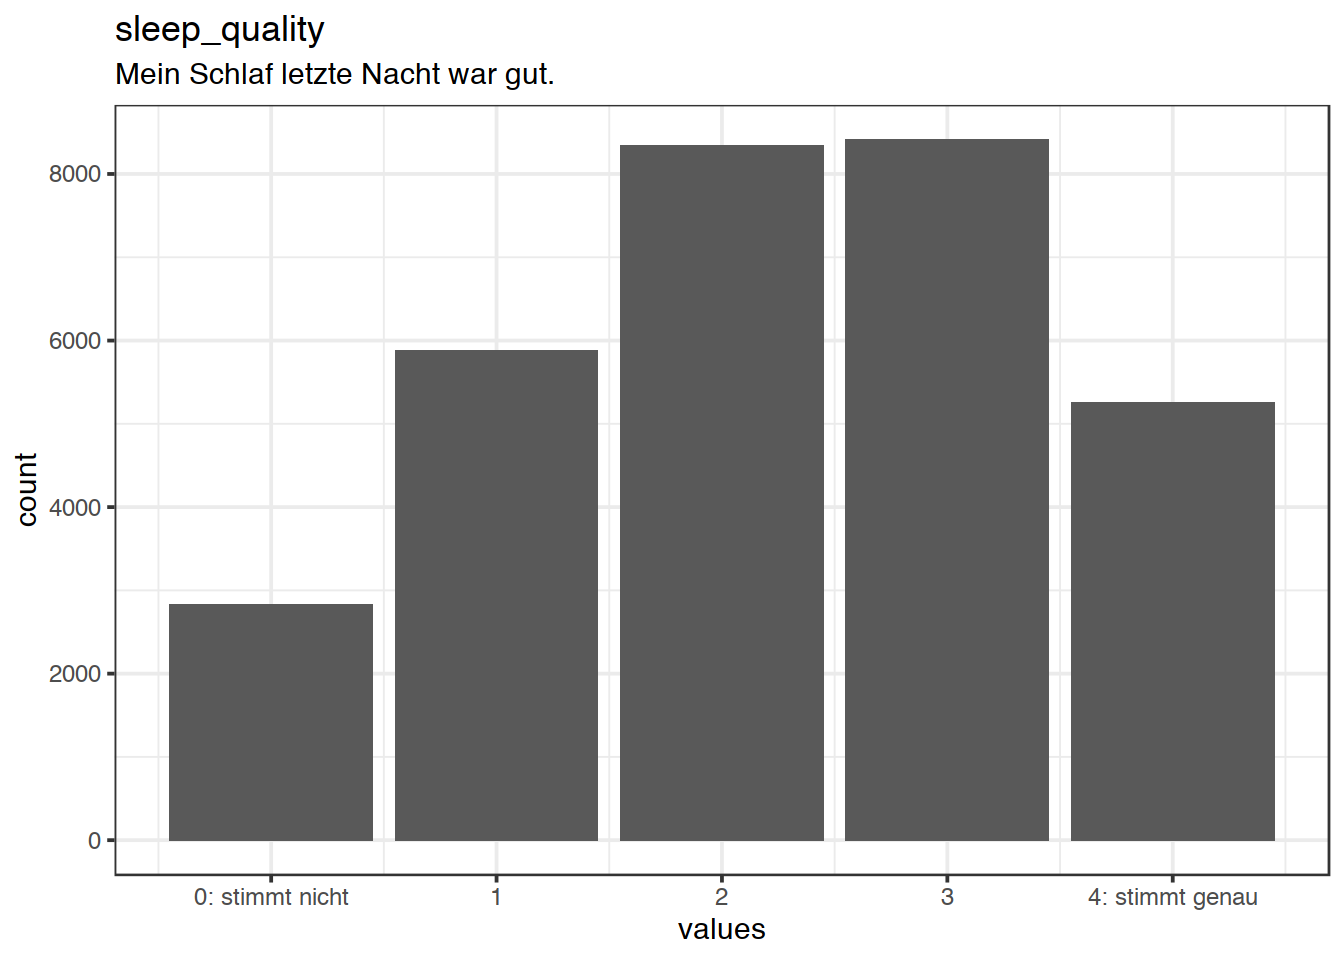 Distribution of values for sleep_quality